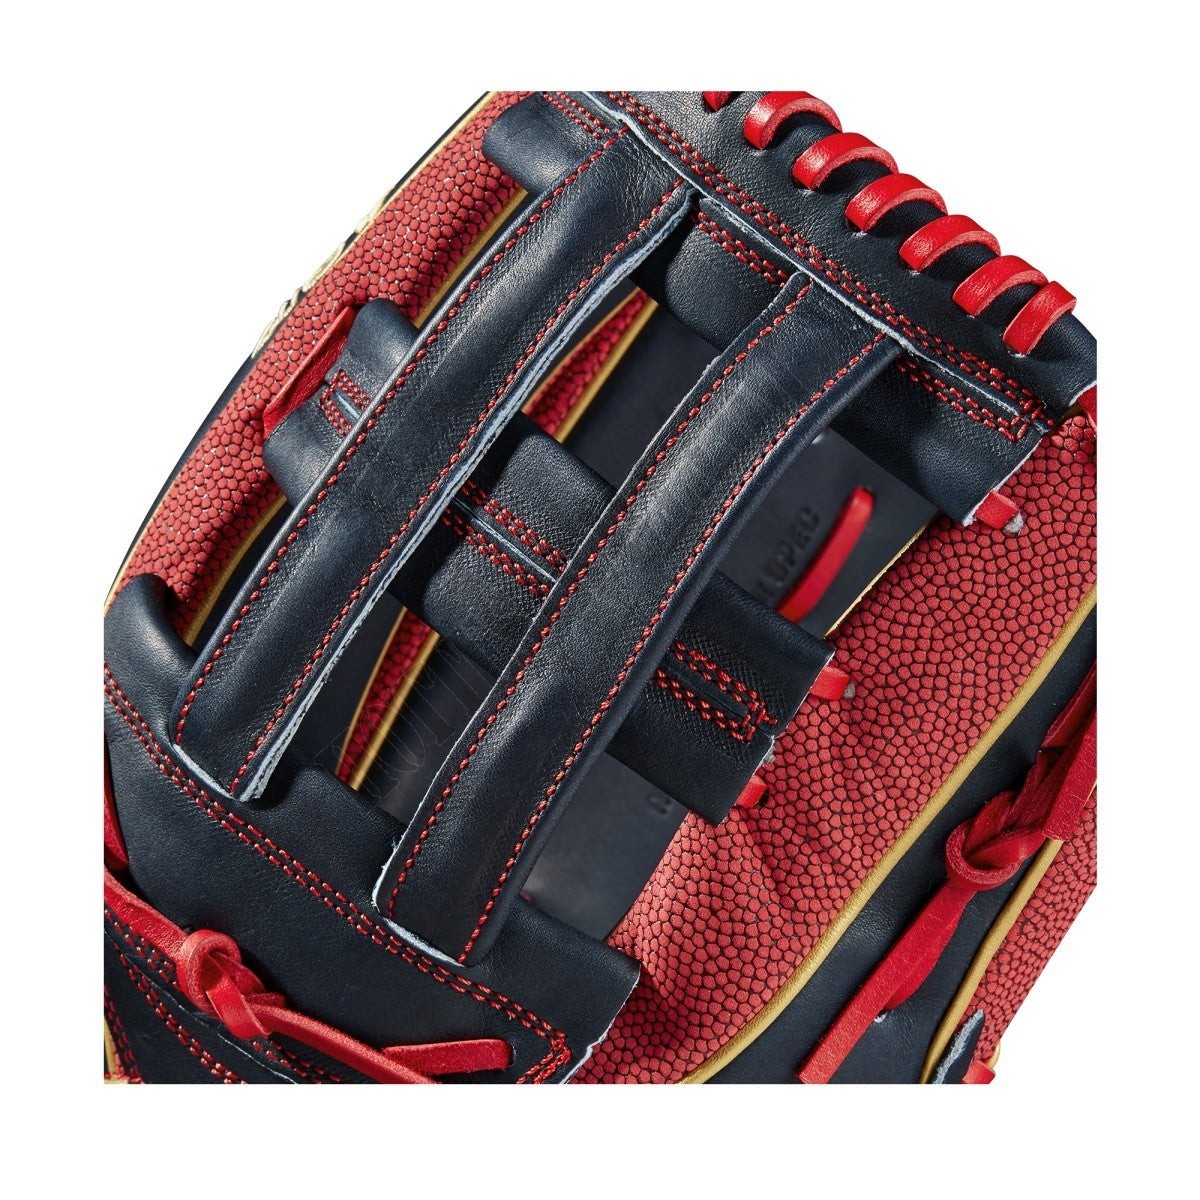 2020 A2K MB50 SuperSkin GM 12.5" Outfield Baseball Glove ● Wilson Promotions - -6